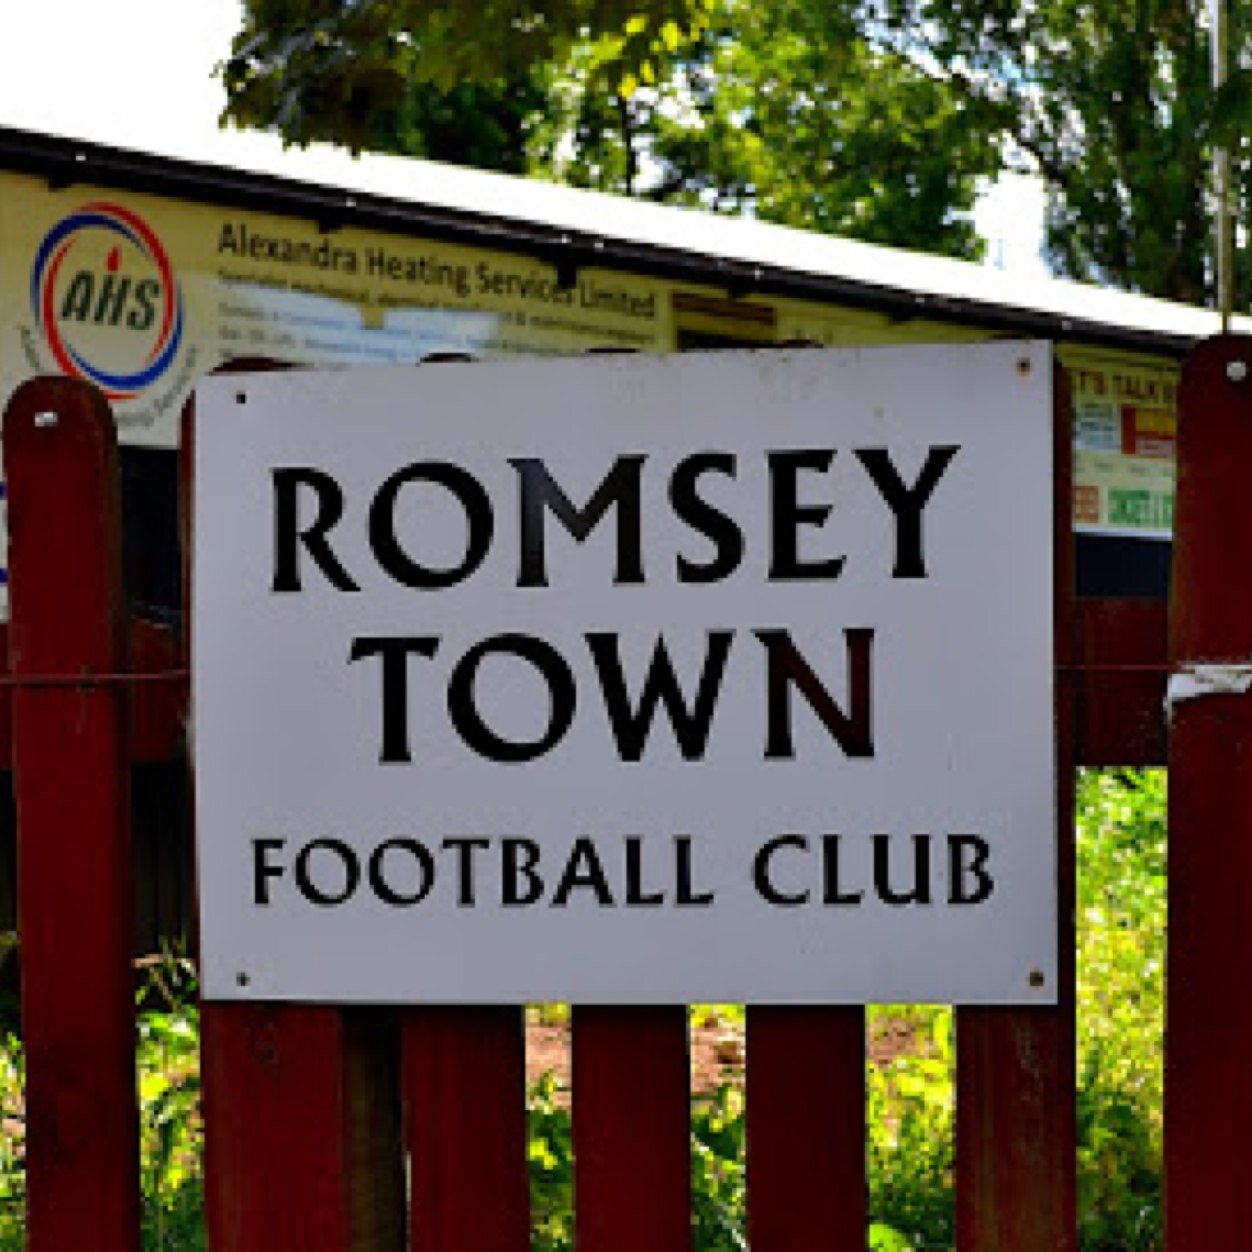 Long time Romsey Fan and Wessex league football, don't get up to the ground as much these days because of work, but still follow all the going's on and gossip.